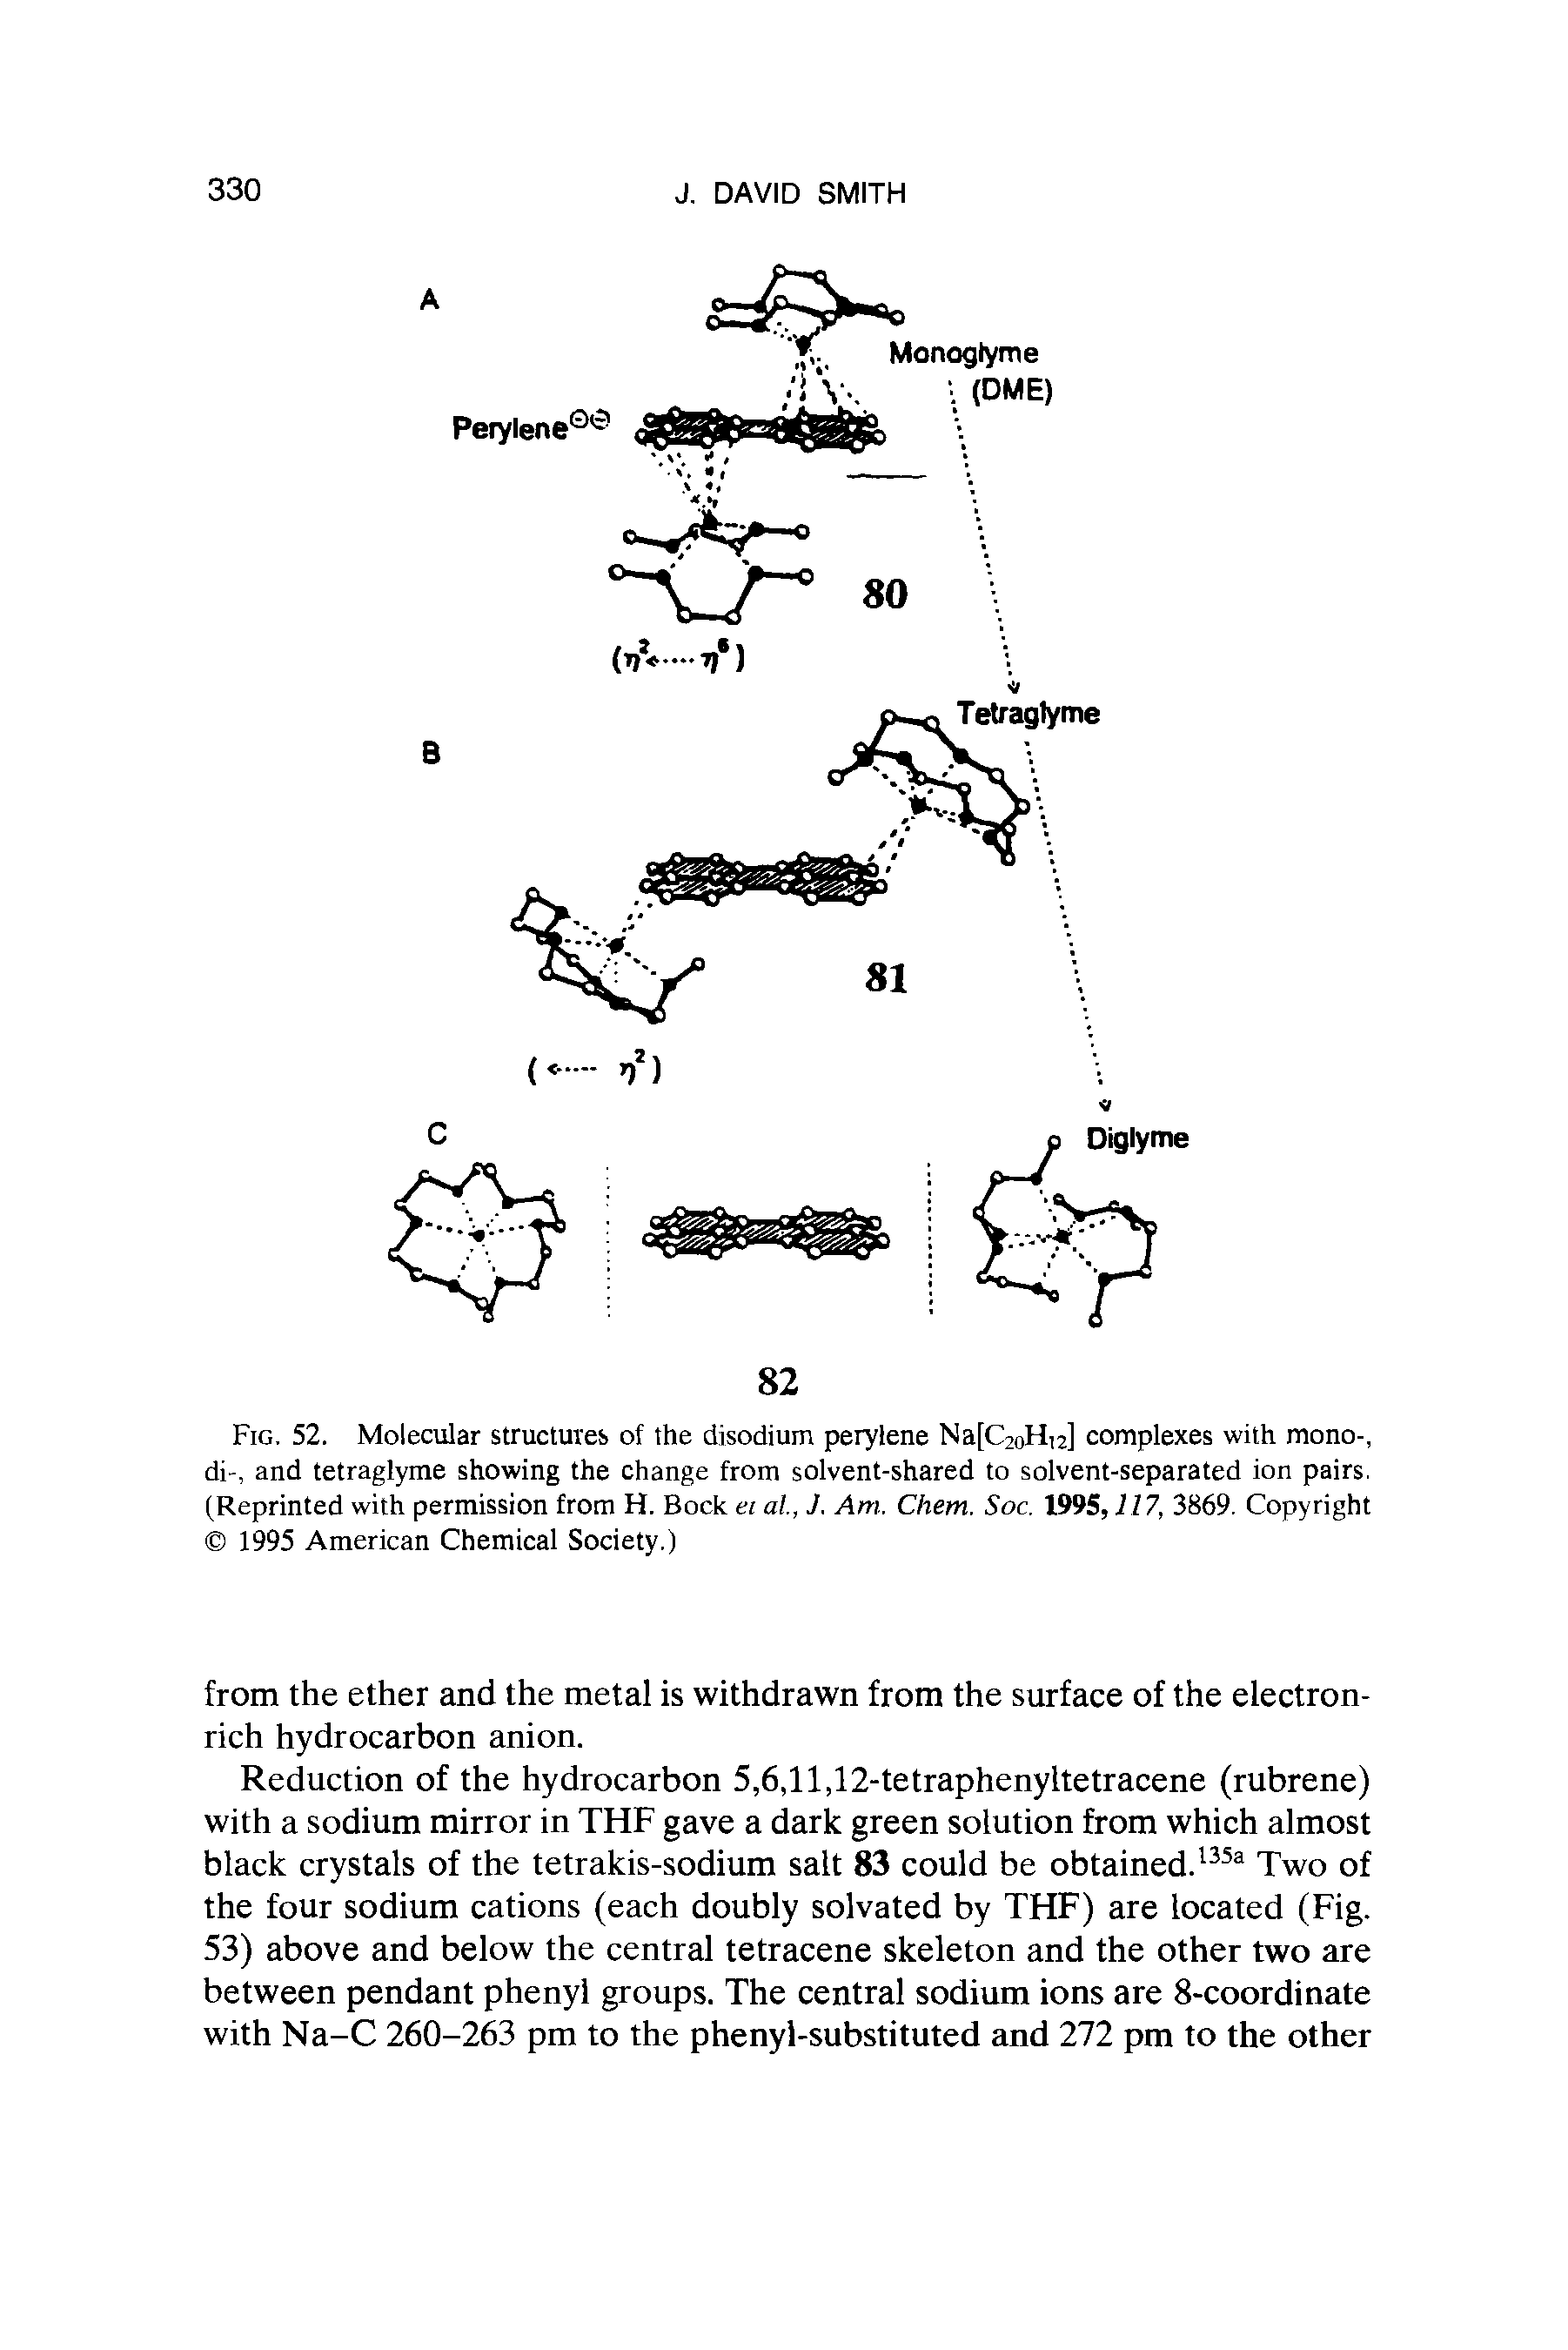 Fig. 52. Molecular structures of the disodium perylene Na[C2oH,2] complexes with mono-, di-, and tetraglyme showing the change from solvent-shared to solvent-separated ion pairs. (Reprinted with permission from H. Bock ei at, J. Am. Chem. Soc. 1995,117, 3869. Copyright 1995 American Chemical Society.)...